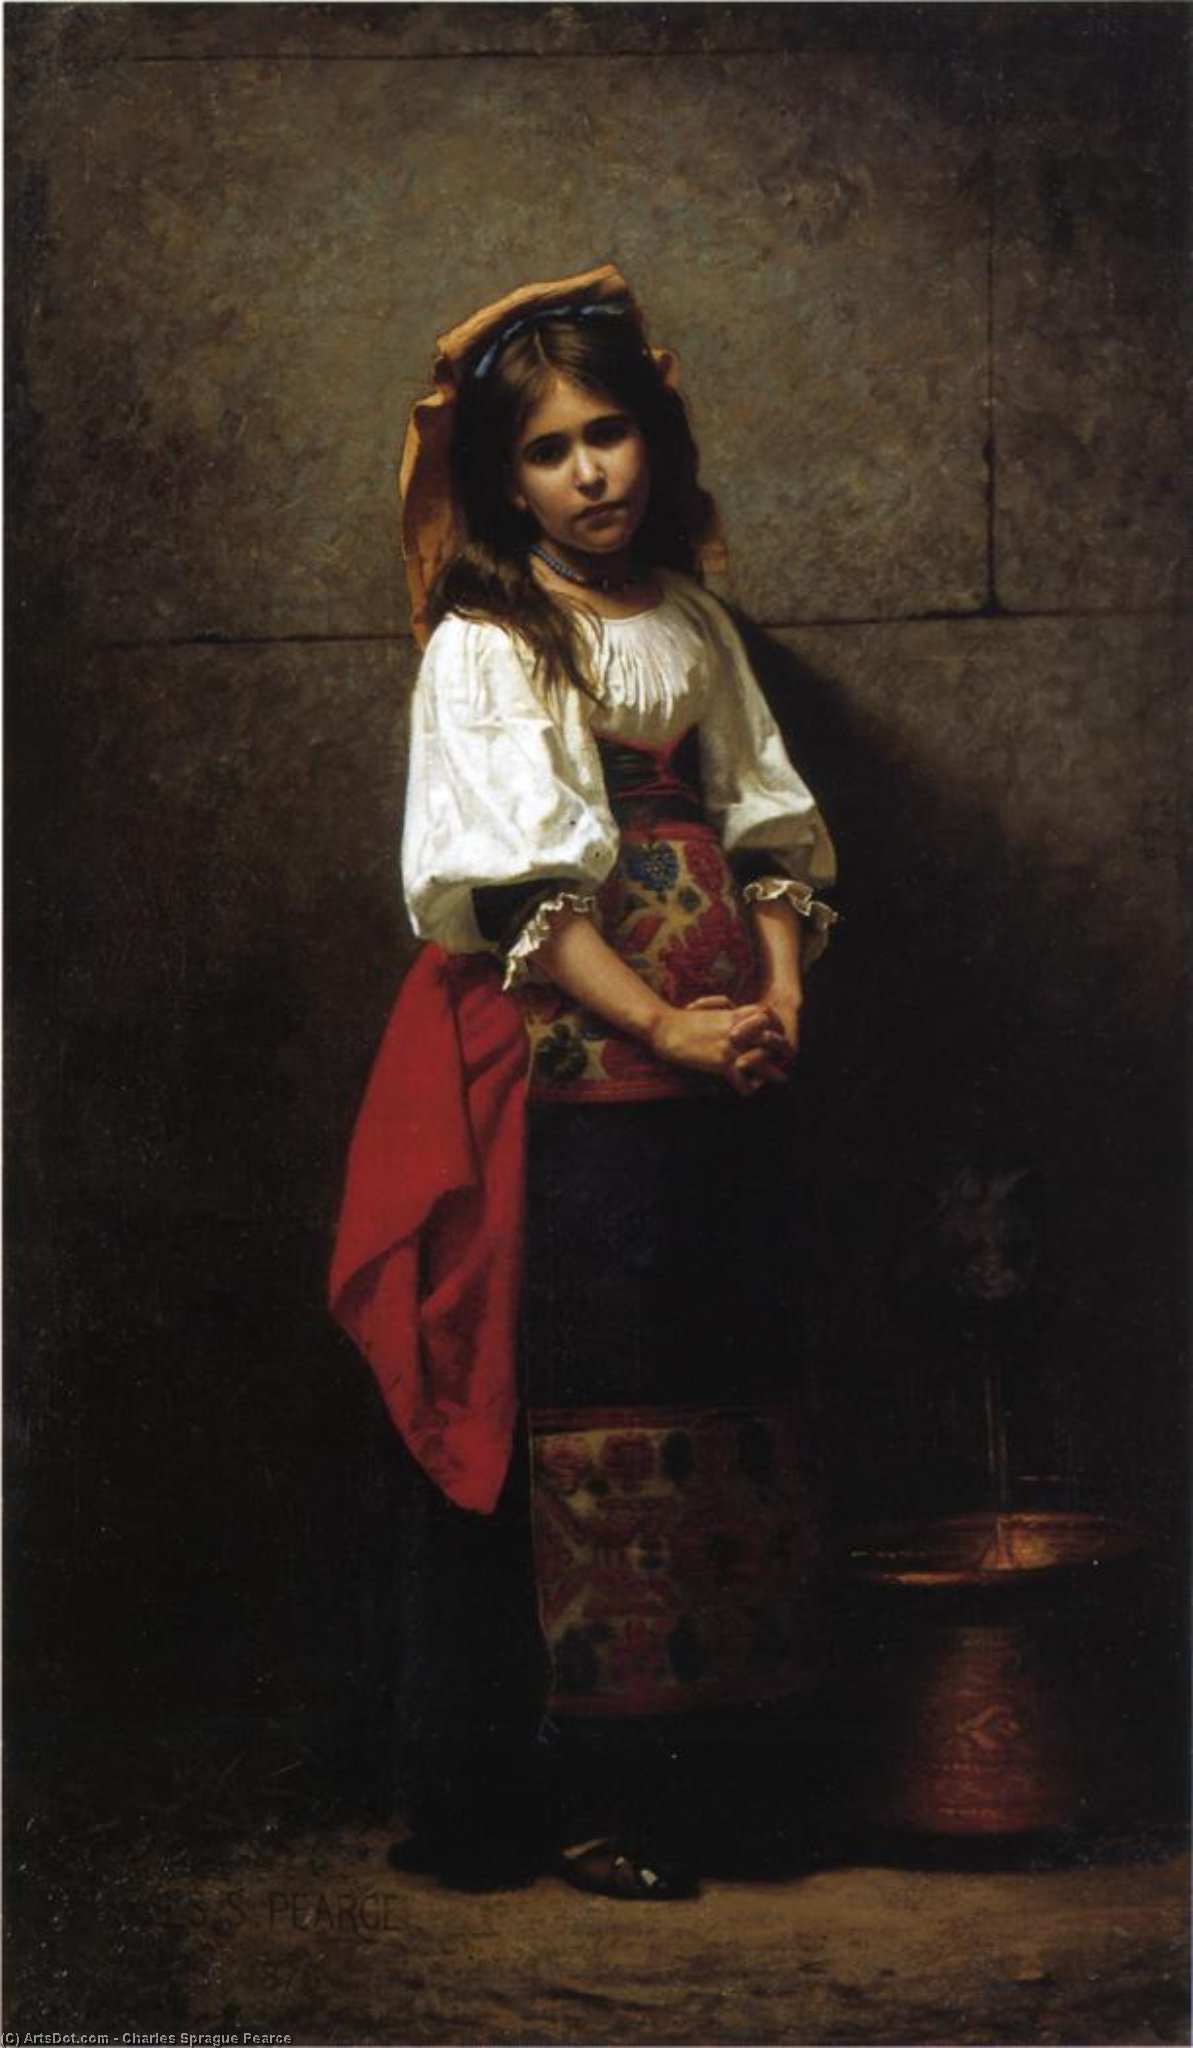 WikiOO.org - 백과 사전 - 회화, 삽화 Charles Sprague Pearce - L'Italienne (also known as At the Fountain)